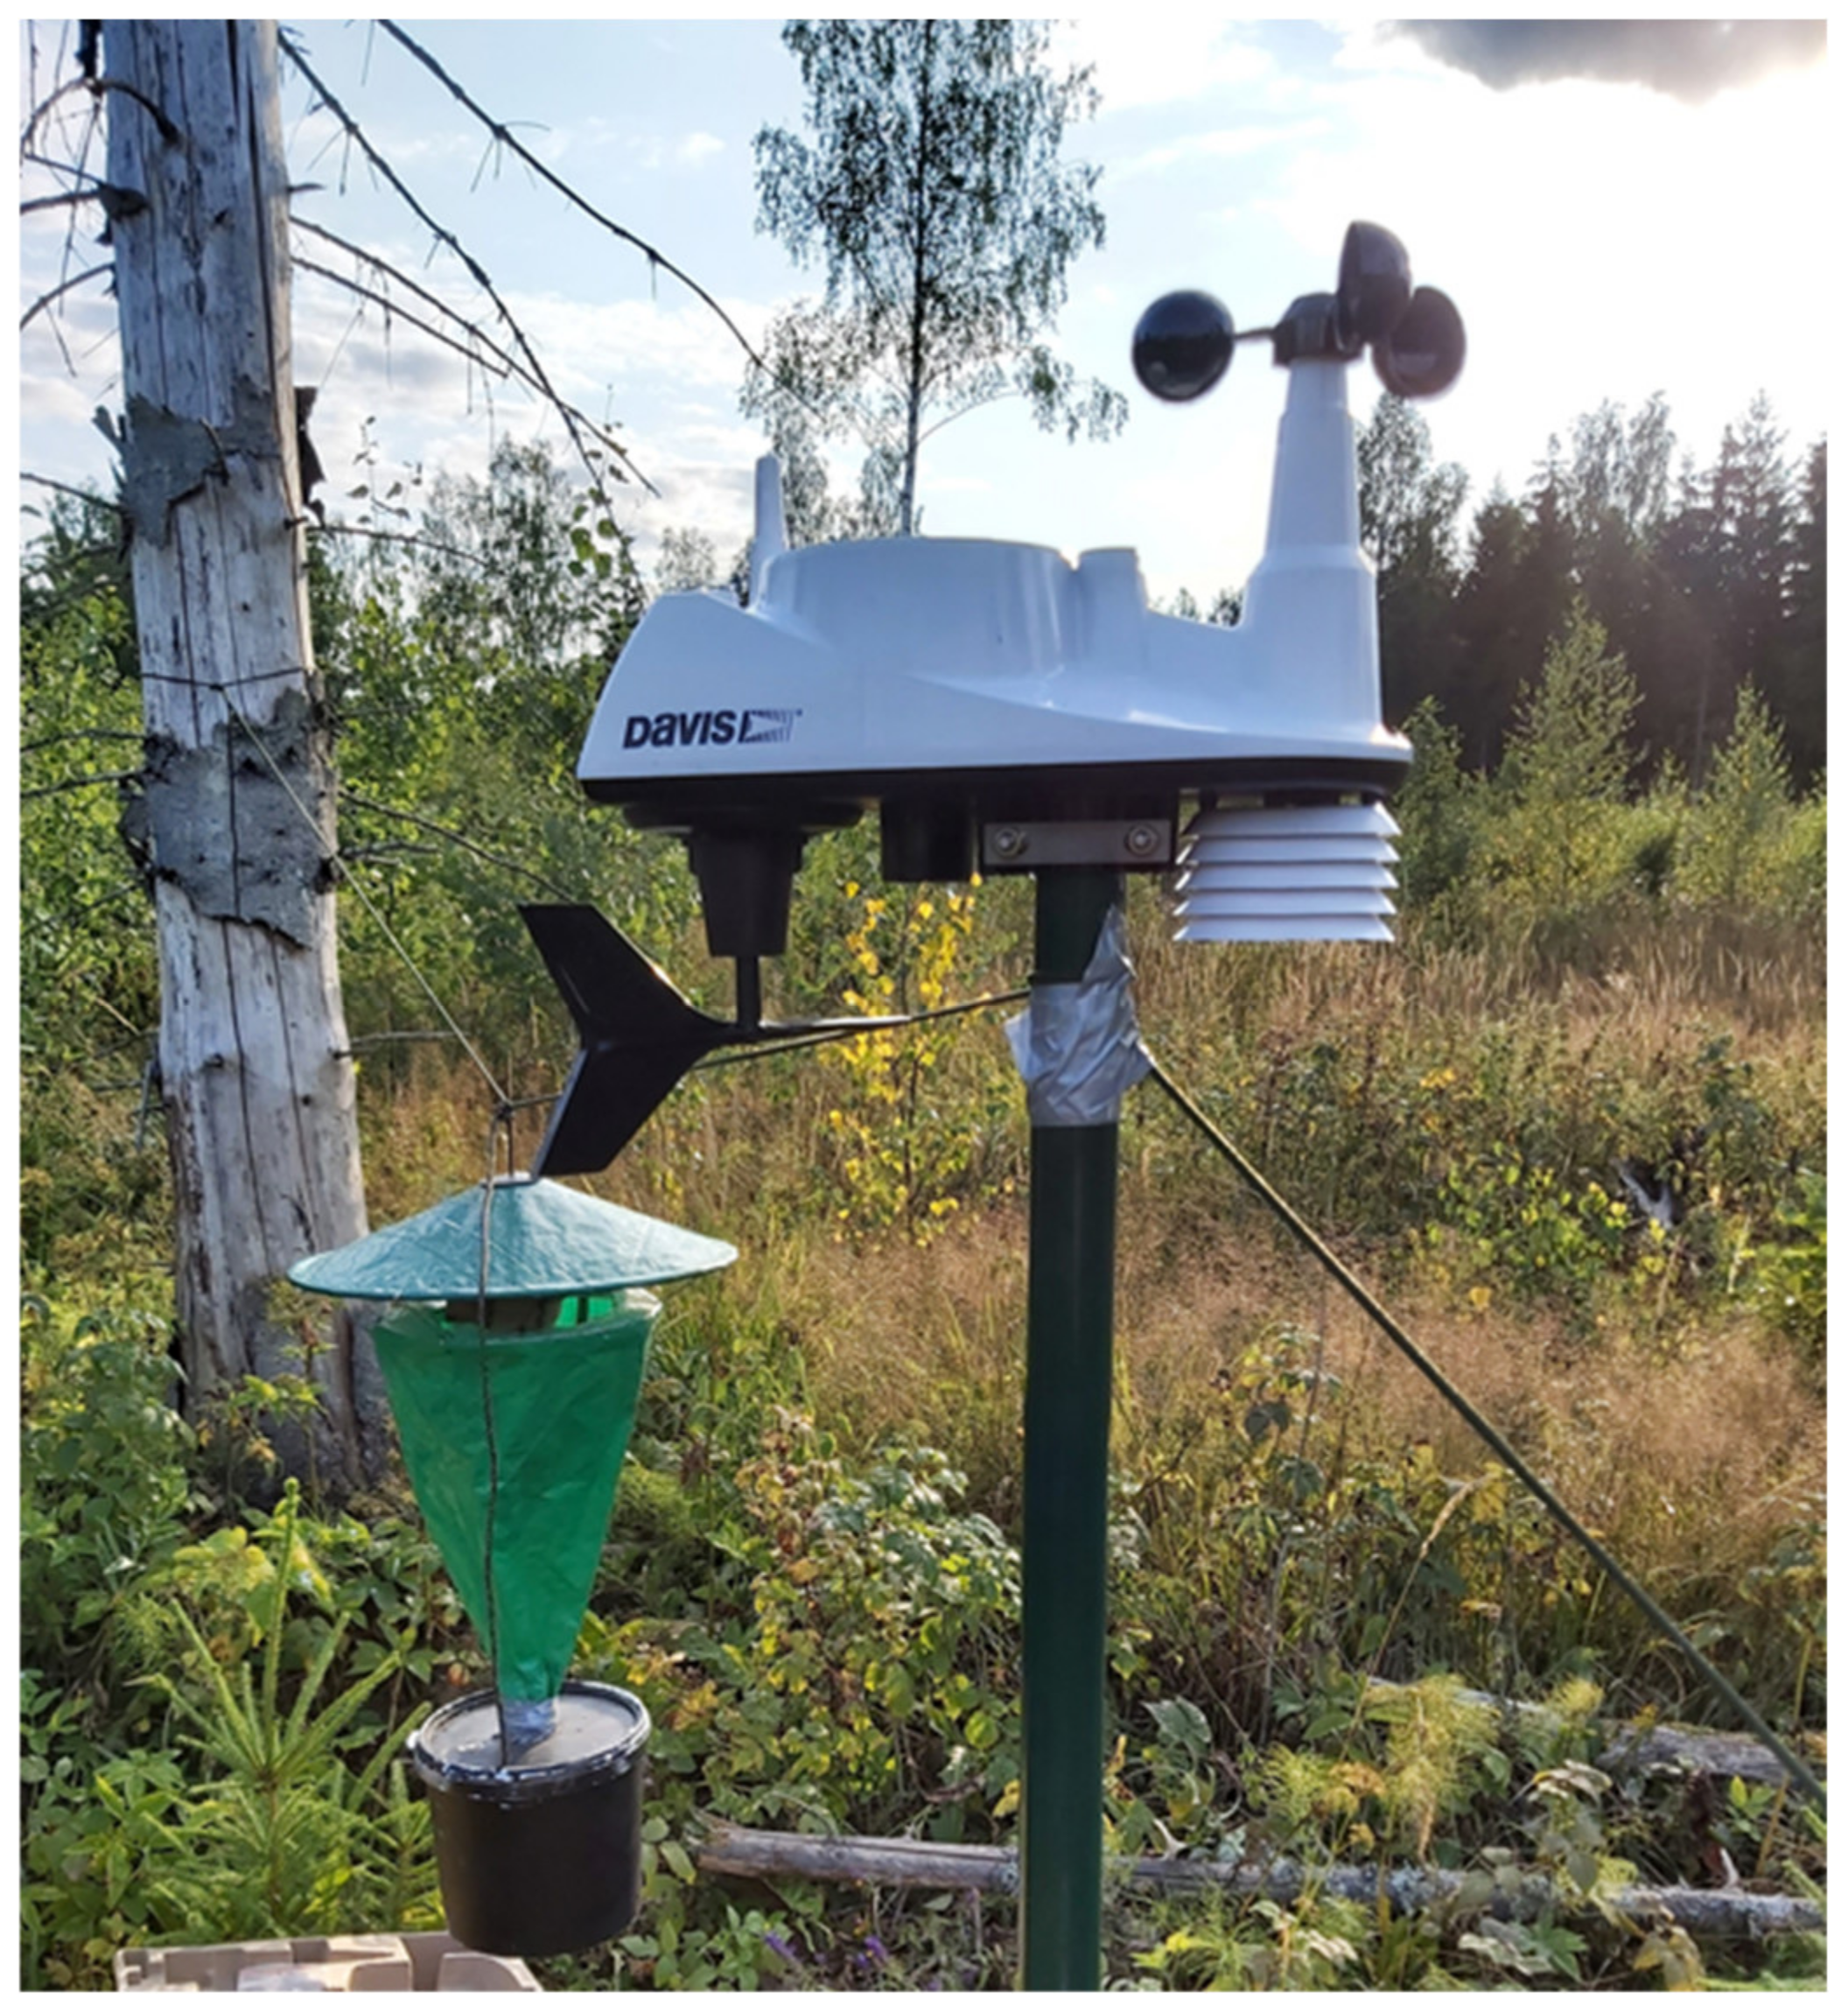 amateur weather recording stations